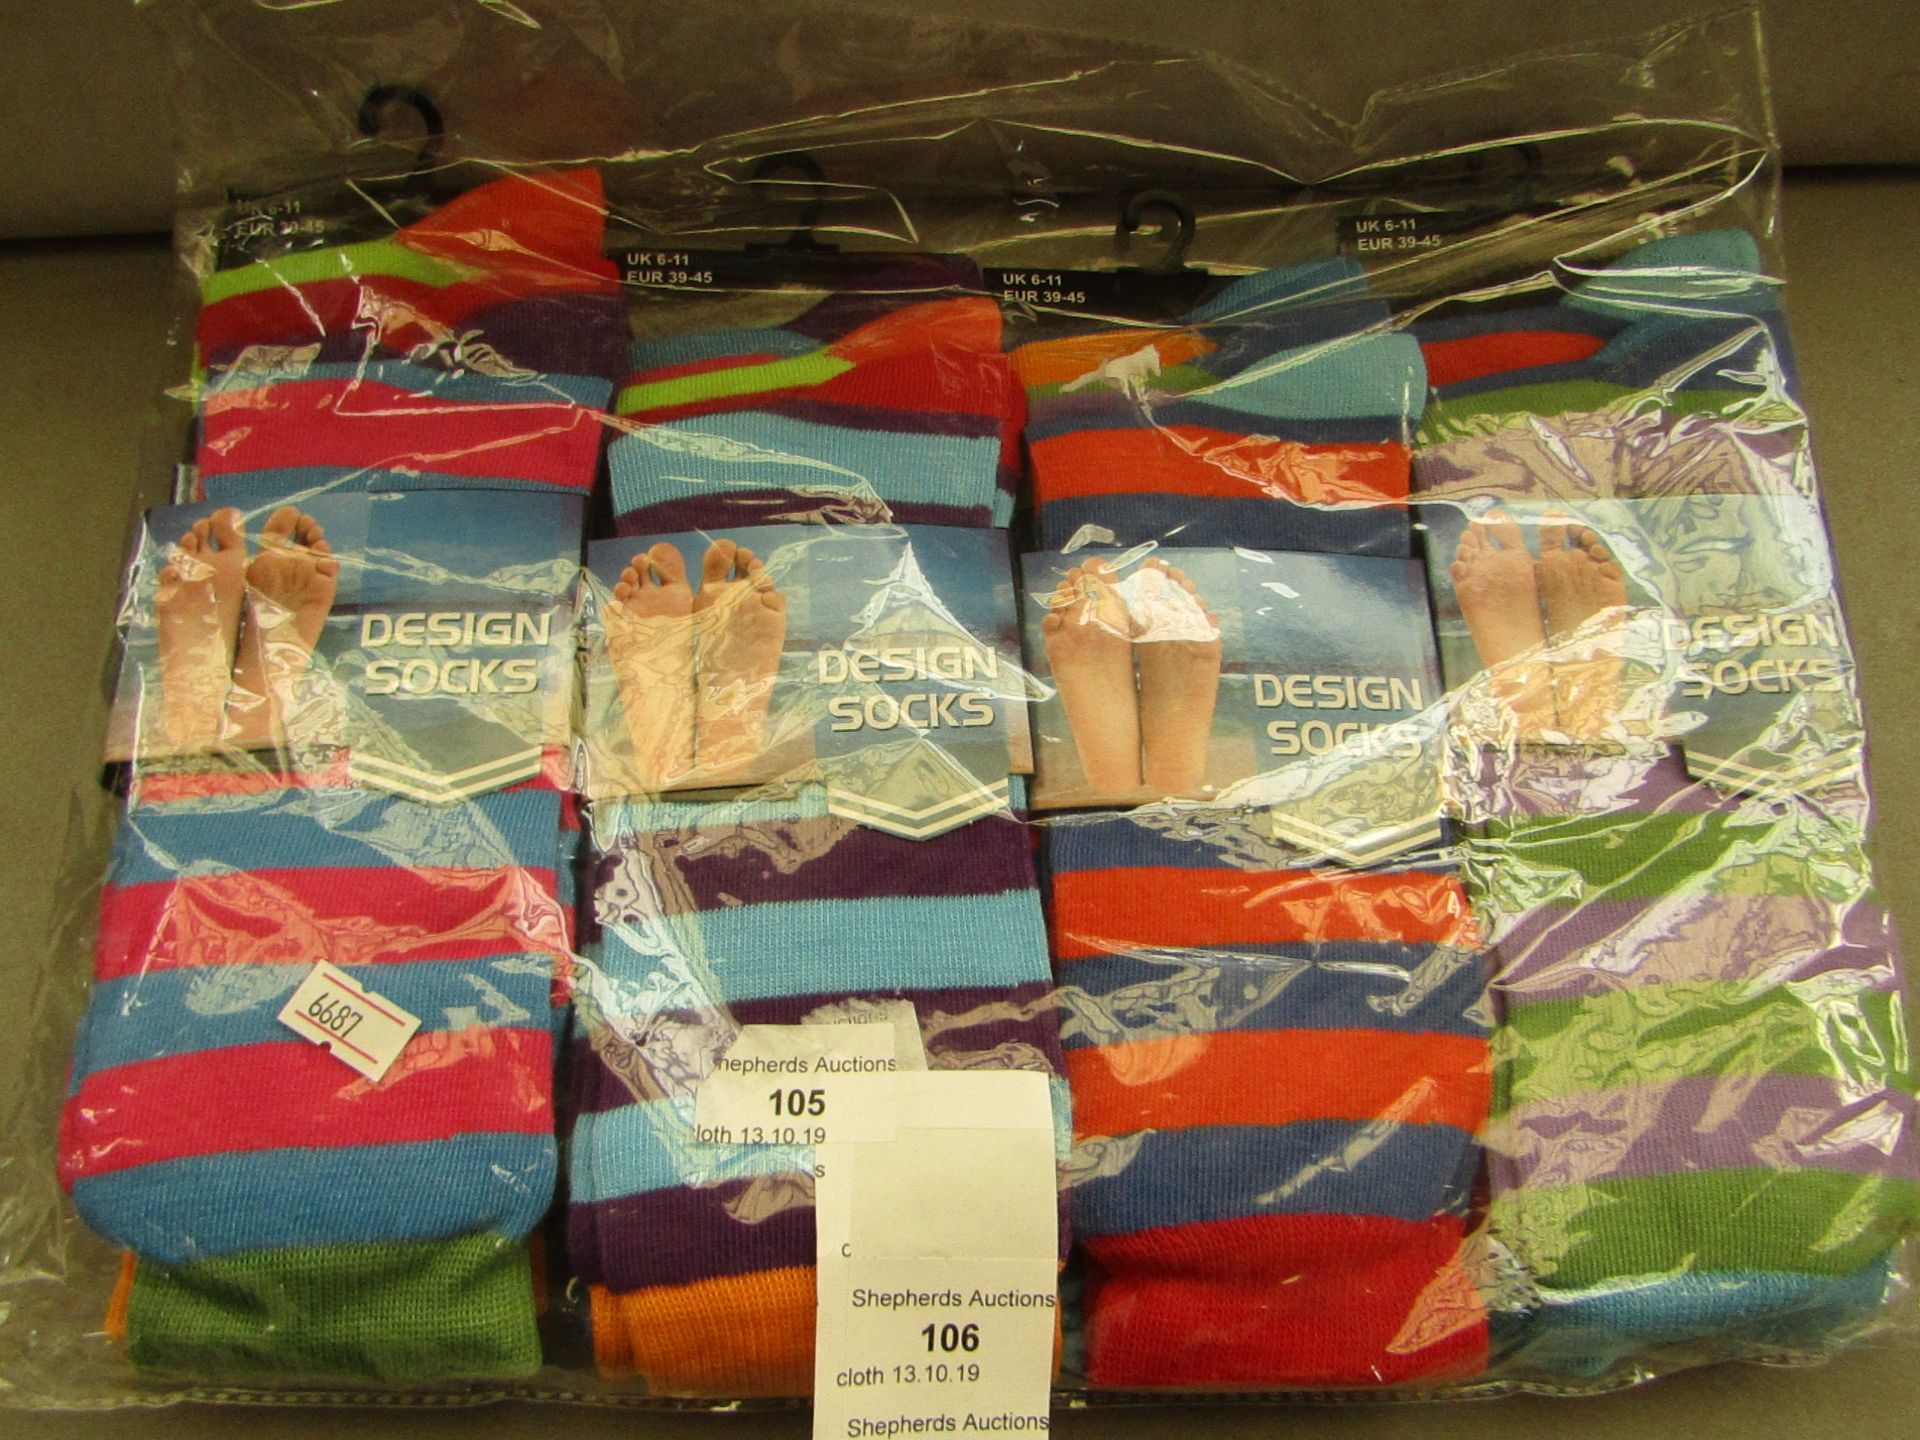 12 x pairs of Design Mens Patterned Socks size 6-11 new & packaged